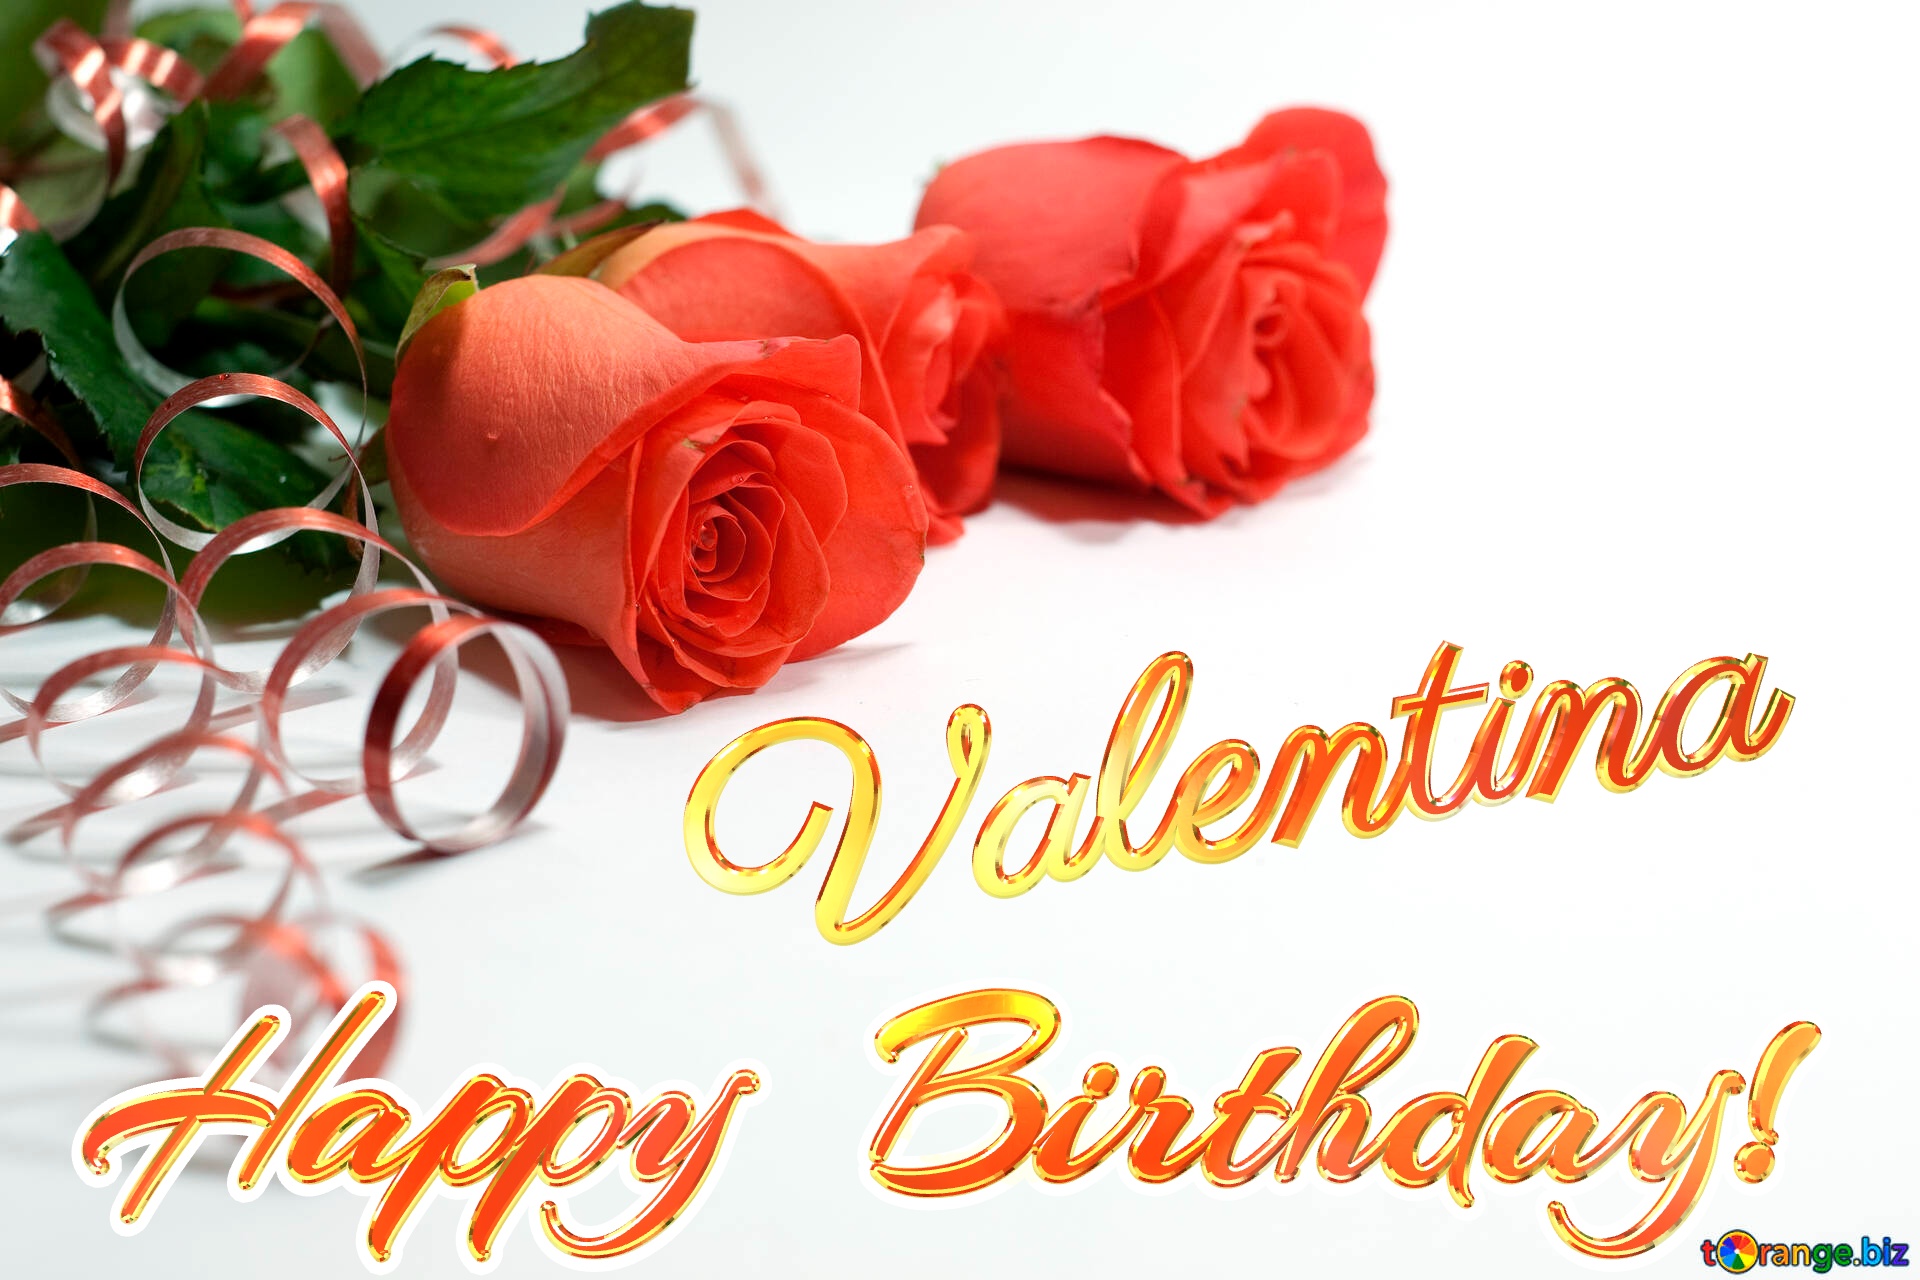 angela youens recommends happy birthday valentina images pic